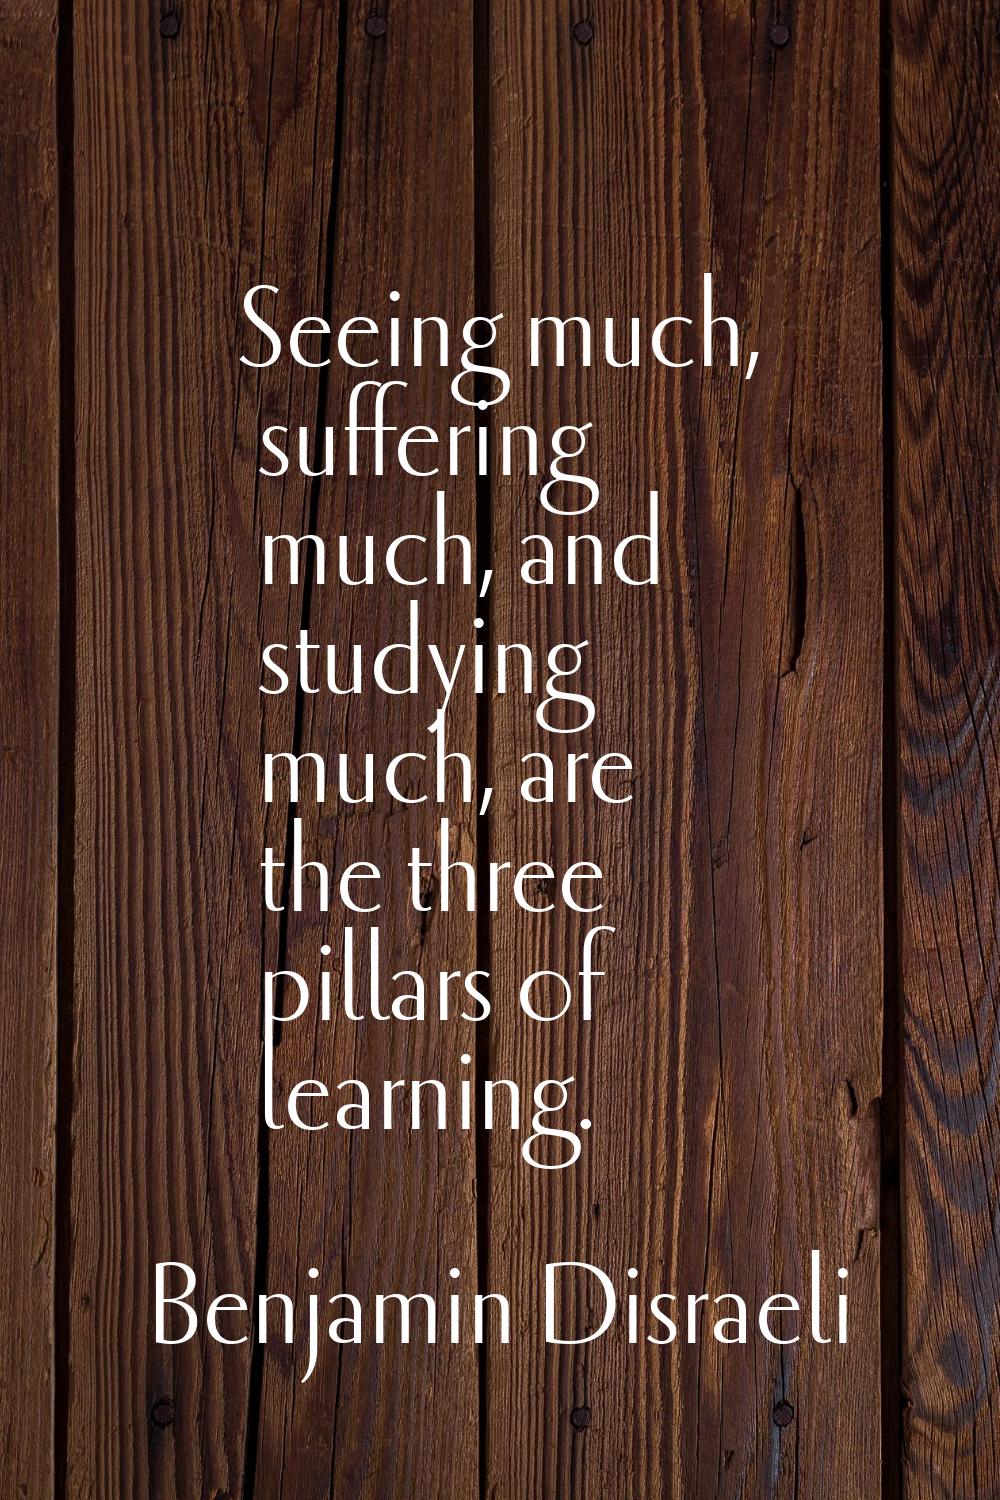 Seeing much, suffering much, and studying much, are the three pillars of learning.